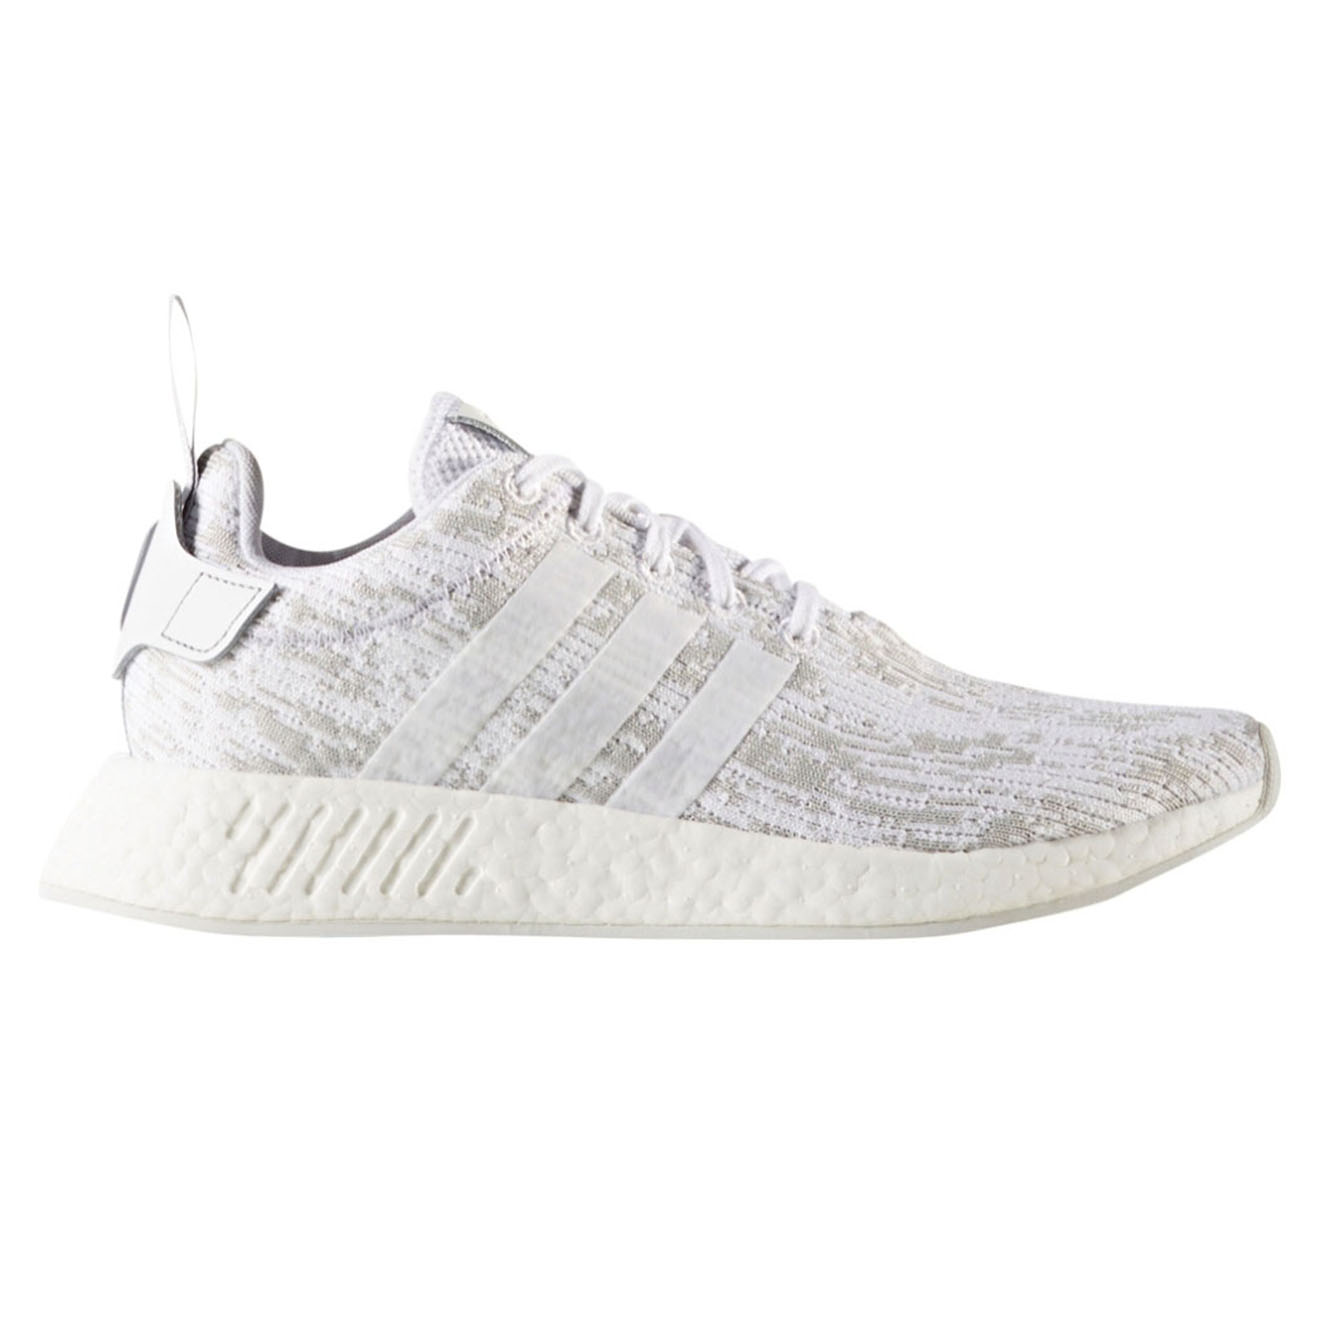 Baskets Nmd R2 W blanches